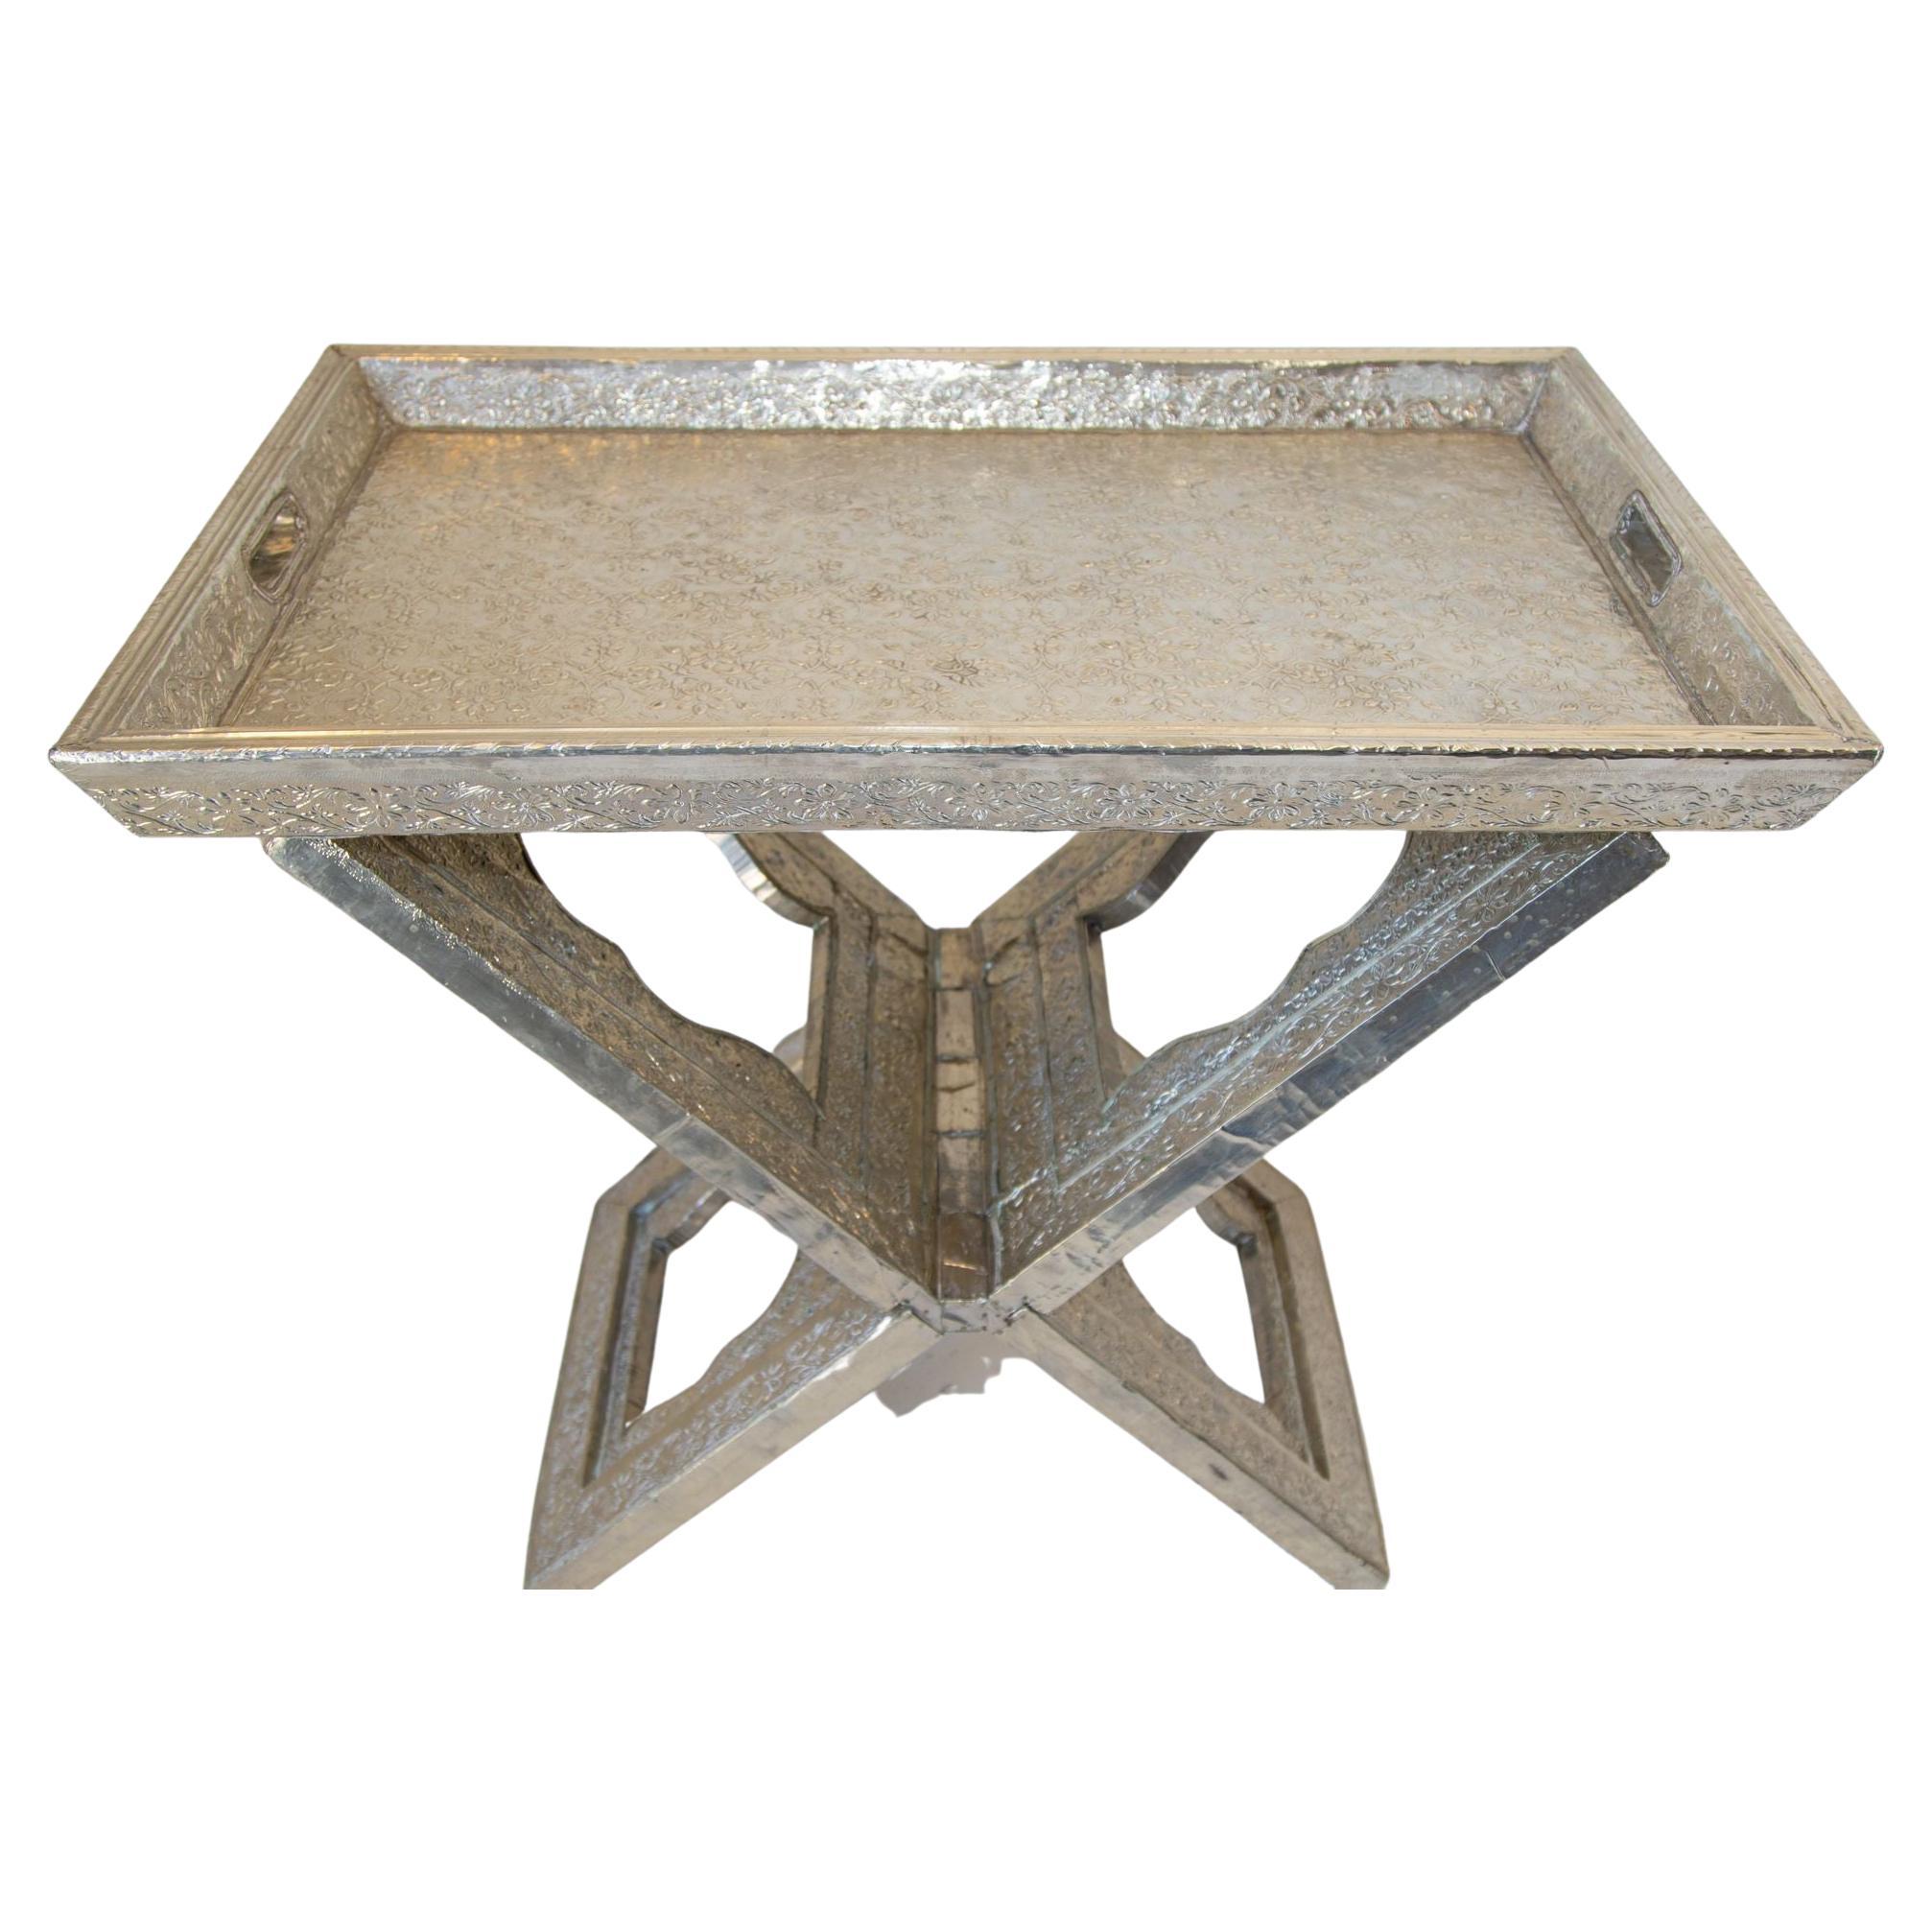 1960 Anglo-Indian Silver Wrapped Clad Folding Tray Table For Sale